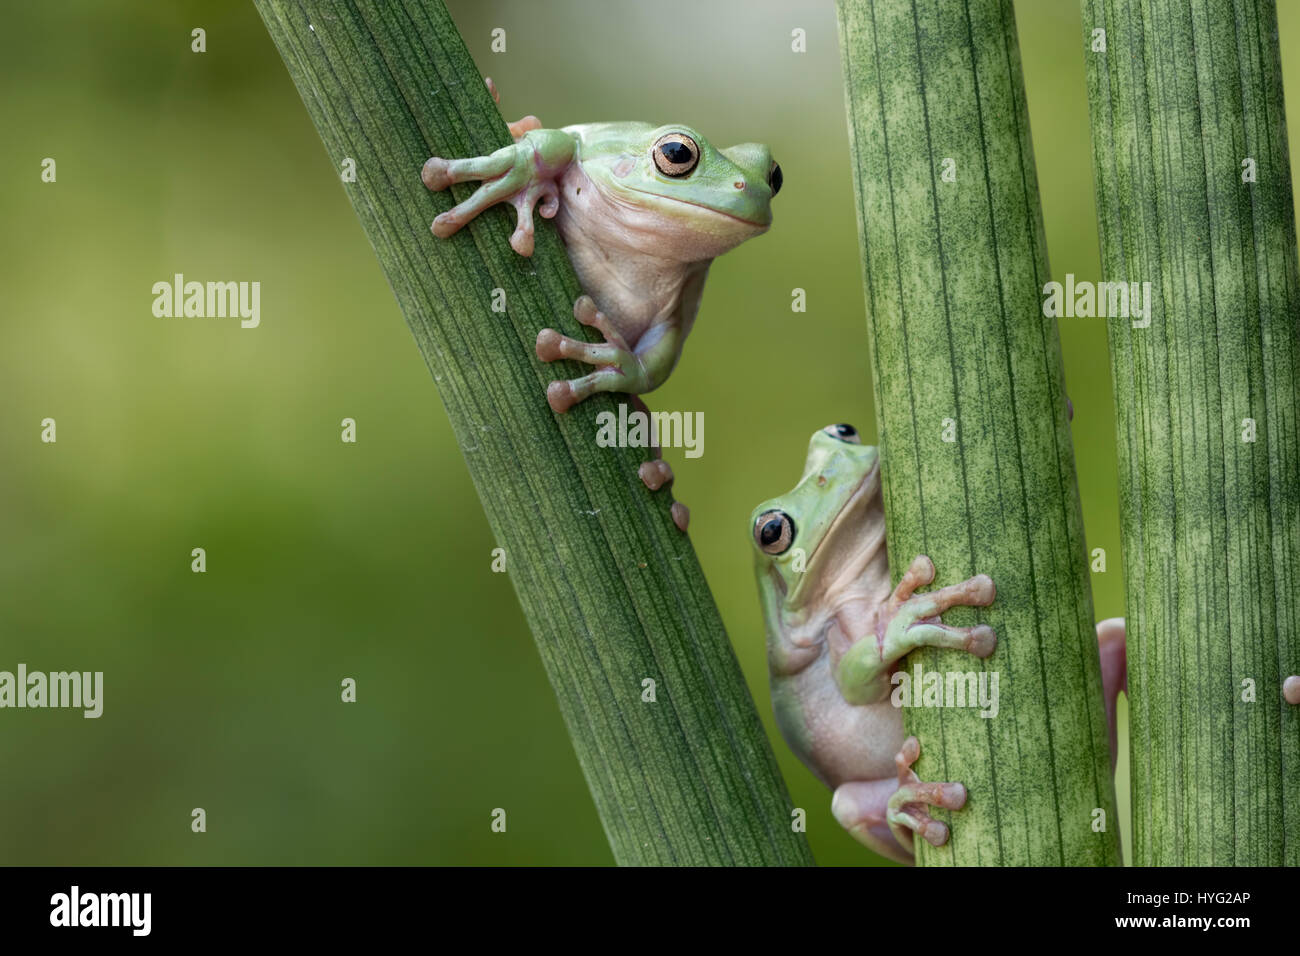 CILEDUG, INDONESIA: TWO FUN-LOVING frogs have been snapped taking part in some serious summer holiday game playing.From the classic leap-frog, to follow the leader and a good old-fashioned staring contest these care-free companions are having the time of their lives, all while balanced in some long grass. Wildlife photography enthusiast Kurit Afsheen (34) was able to capture these charming moments in Ciledug, Indonesia. Stock Photo